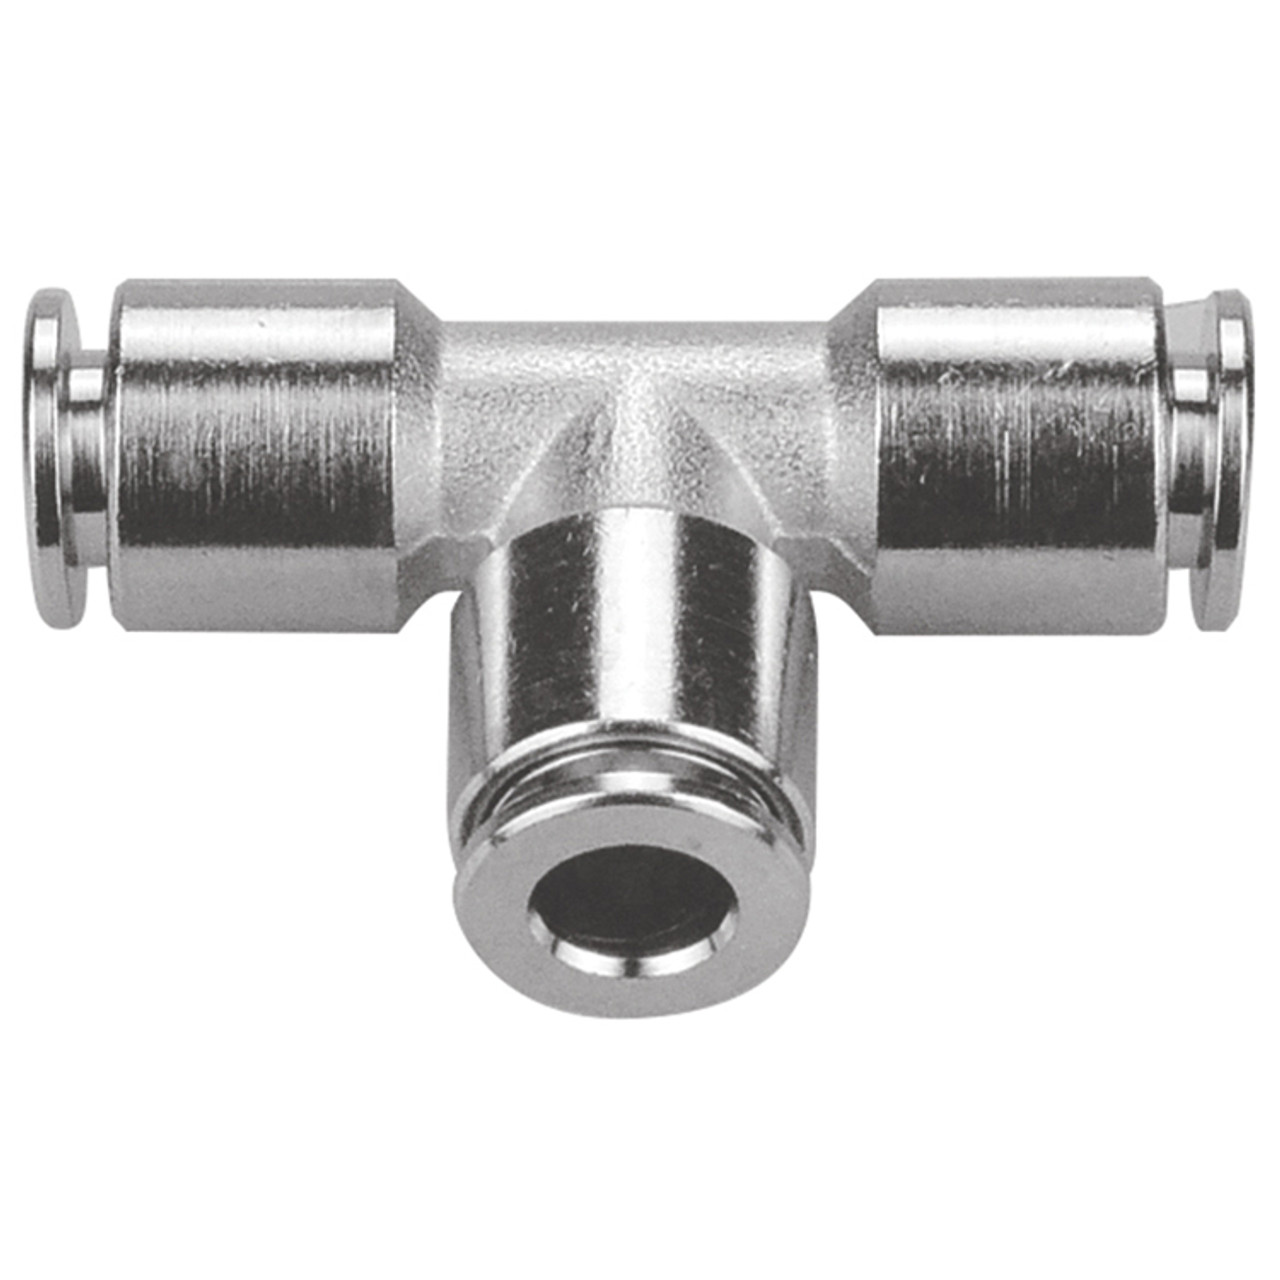 6mm Nickel Plated Brass Push-To-Connect Tee   G60T00PM-06M-06M